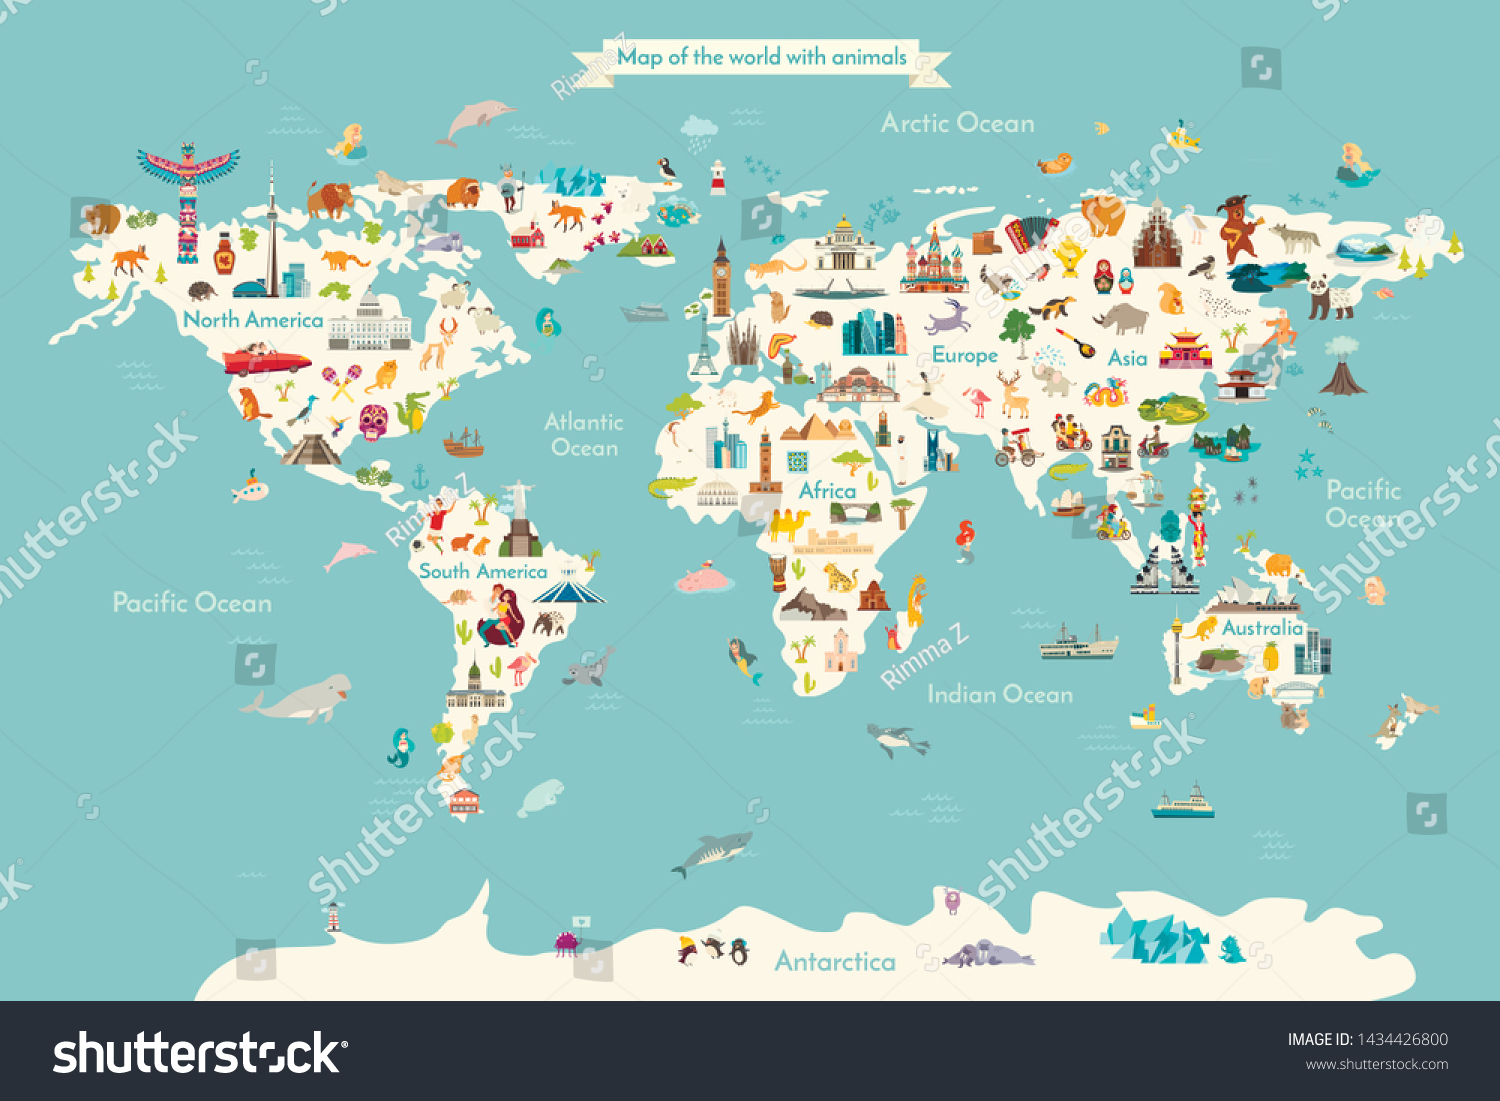 Landmarks world map vector crtoon illustration. Cartoon globe vector illustration. landmarks, signs, animals of countries and continents. Abstract map for learning. Poster, picture, card #1434426800